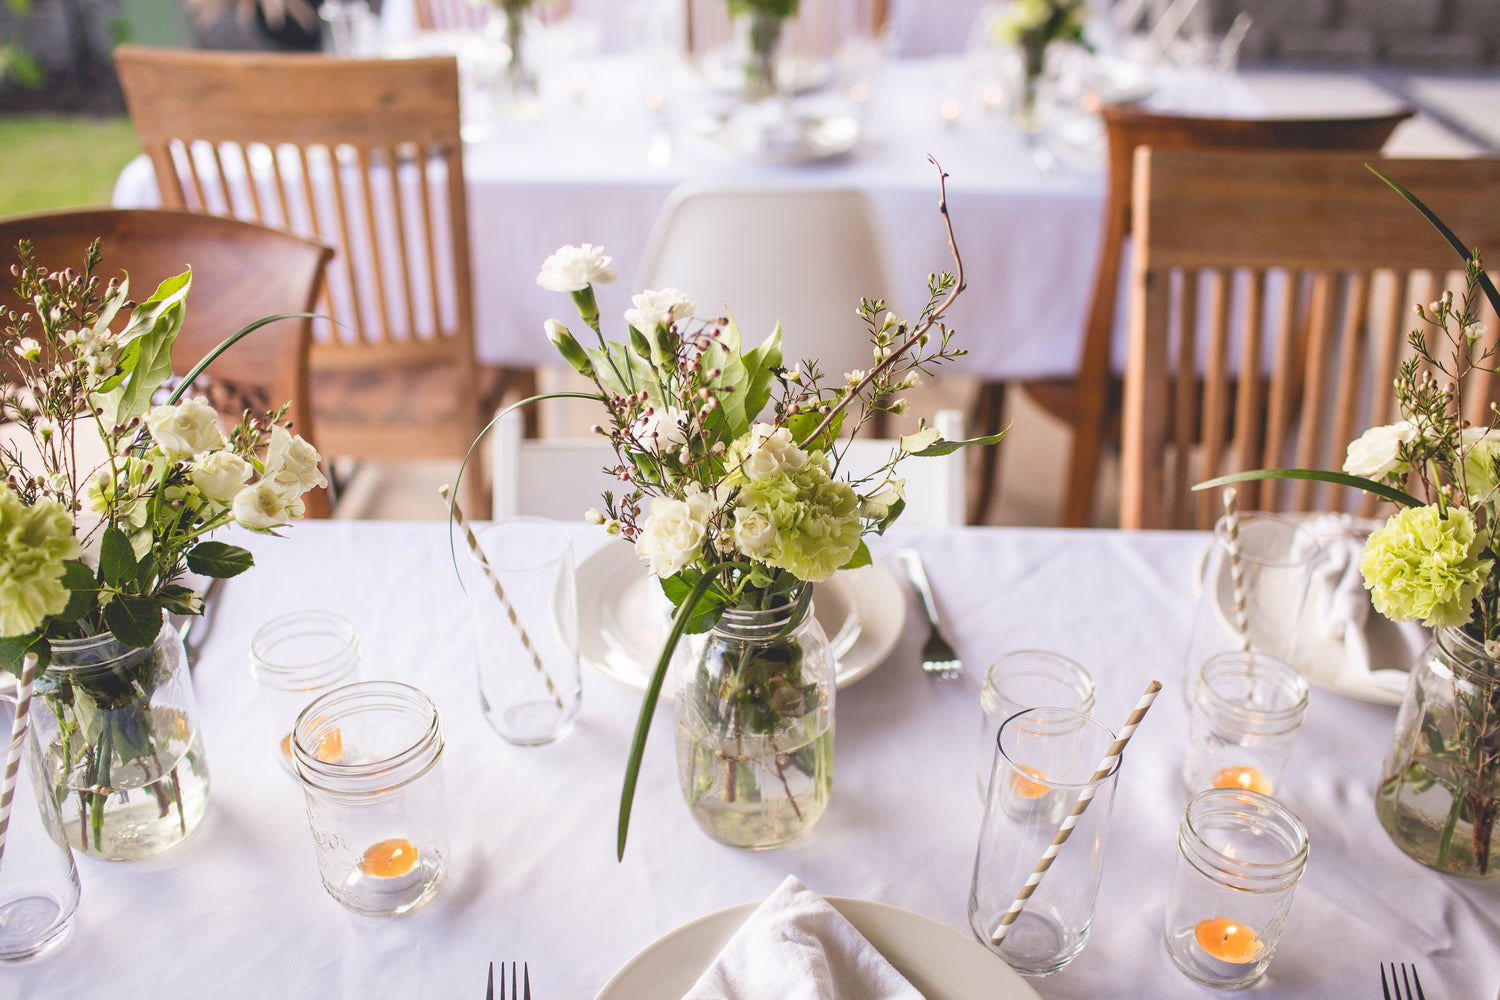 Tips for Throwing a Summer Outdoor Dining Soiree